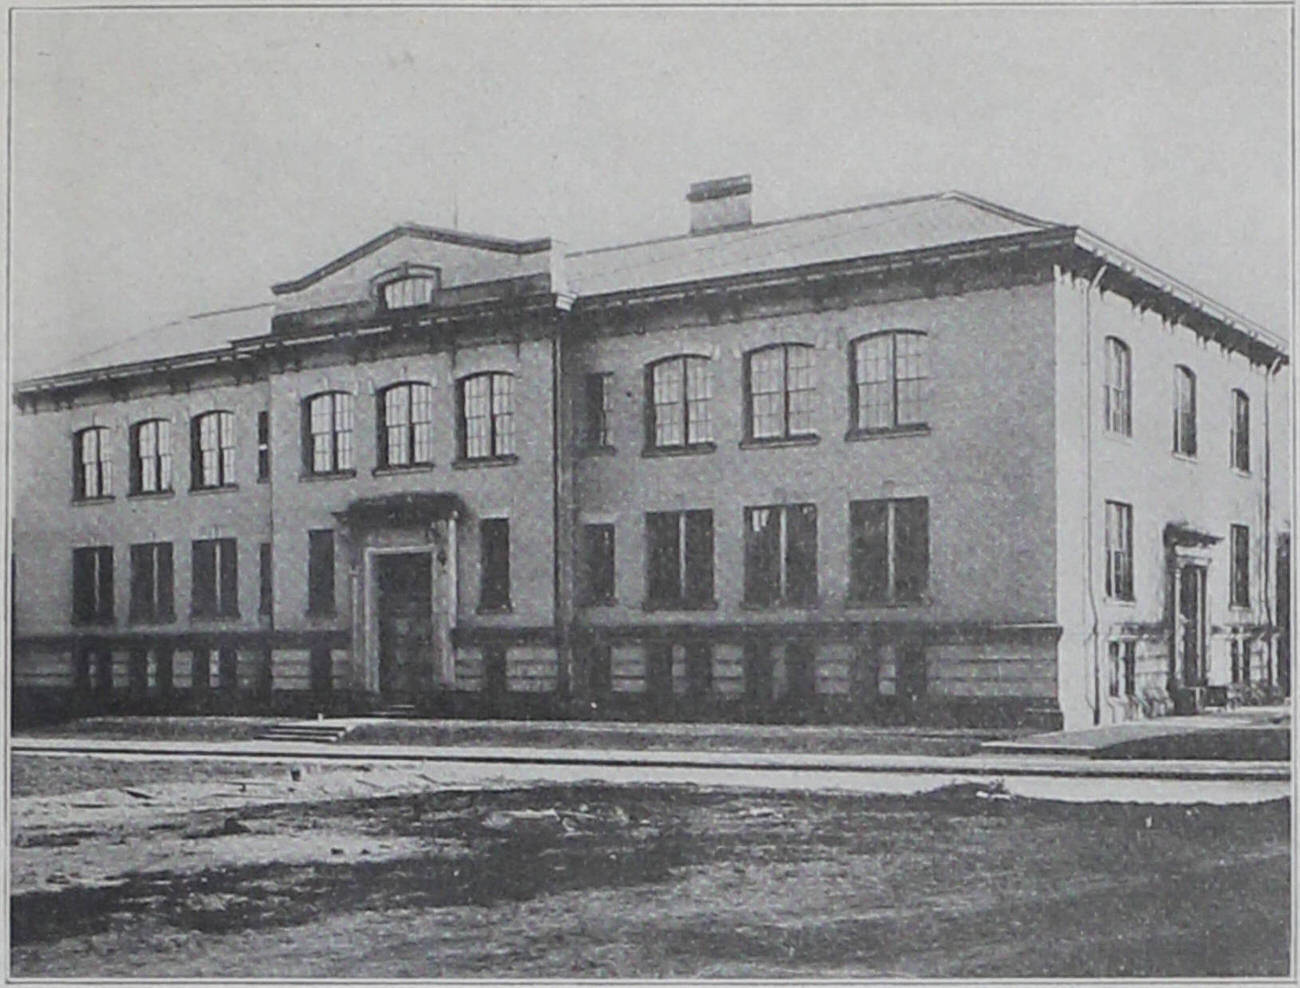 Eastwood Avenue Elementary School, opened in 1905, remodeled in 1955, closed and demolished in 1974. Circa 1916.